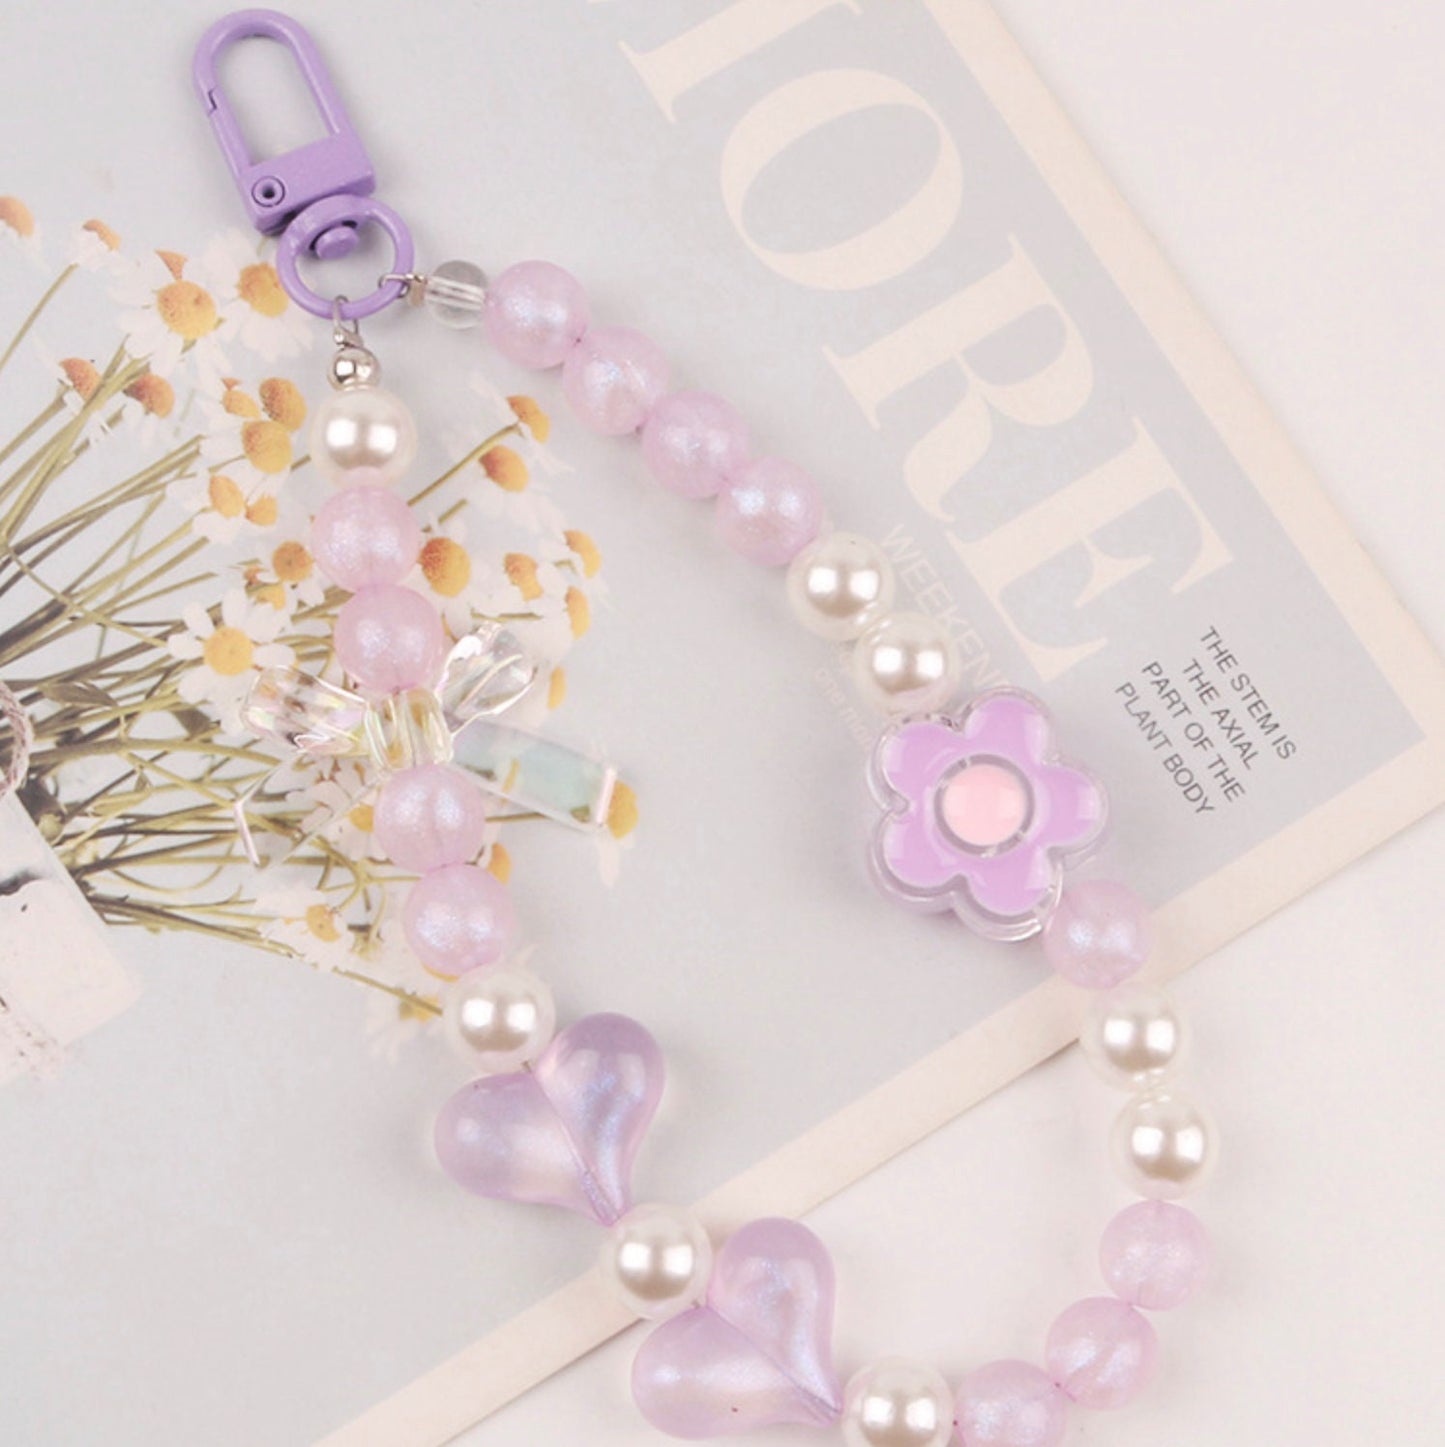 15CM Cute Acrylic Round Bead Strand with Flowers and Bows Bead Keychain, Key ring, Phone Lanyard